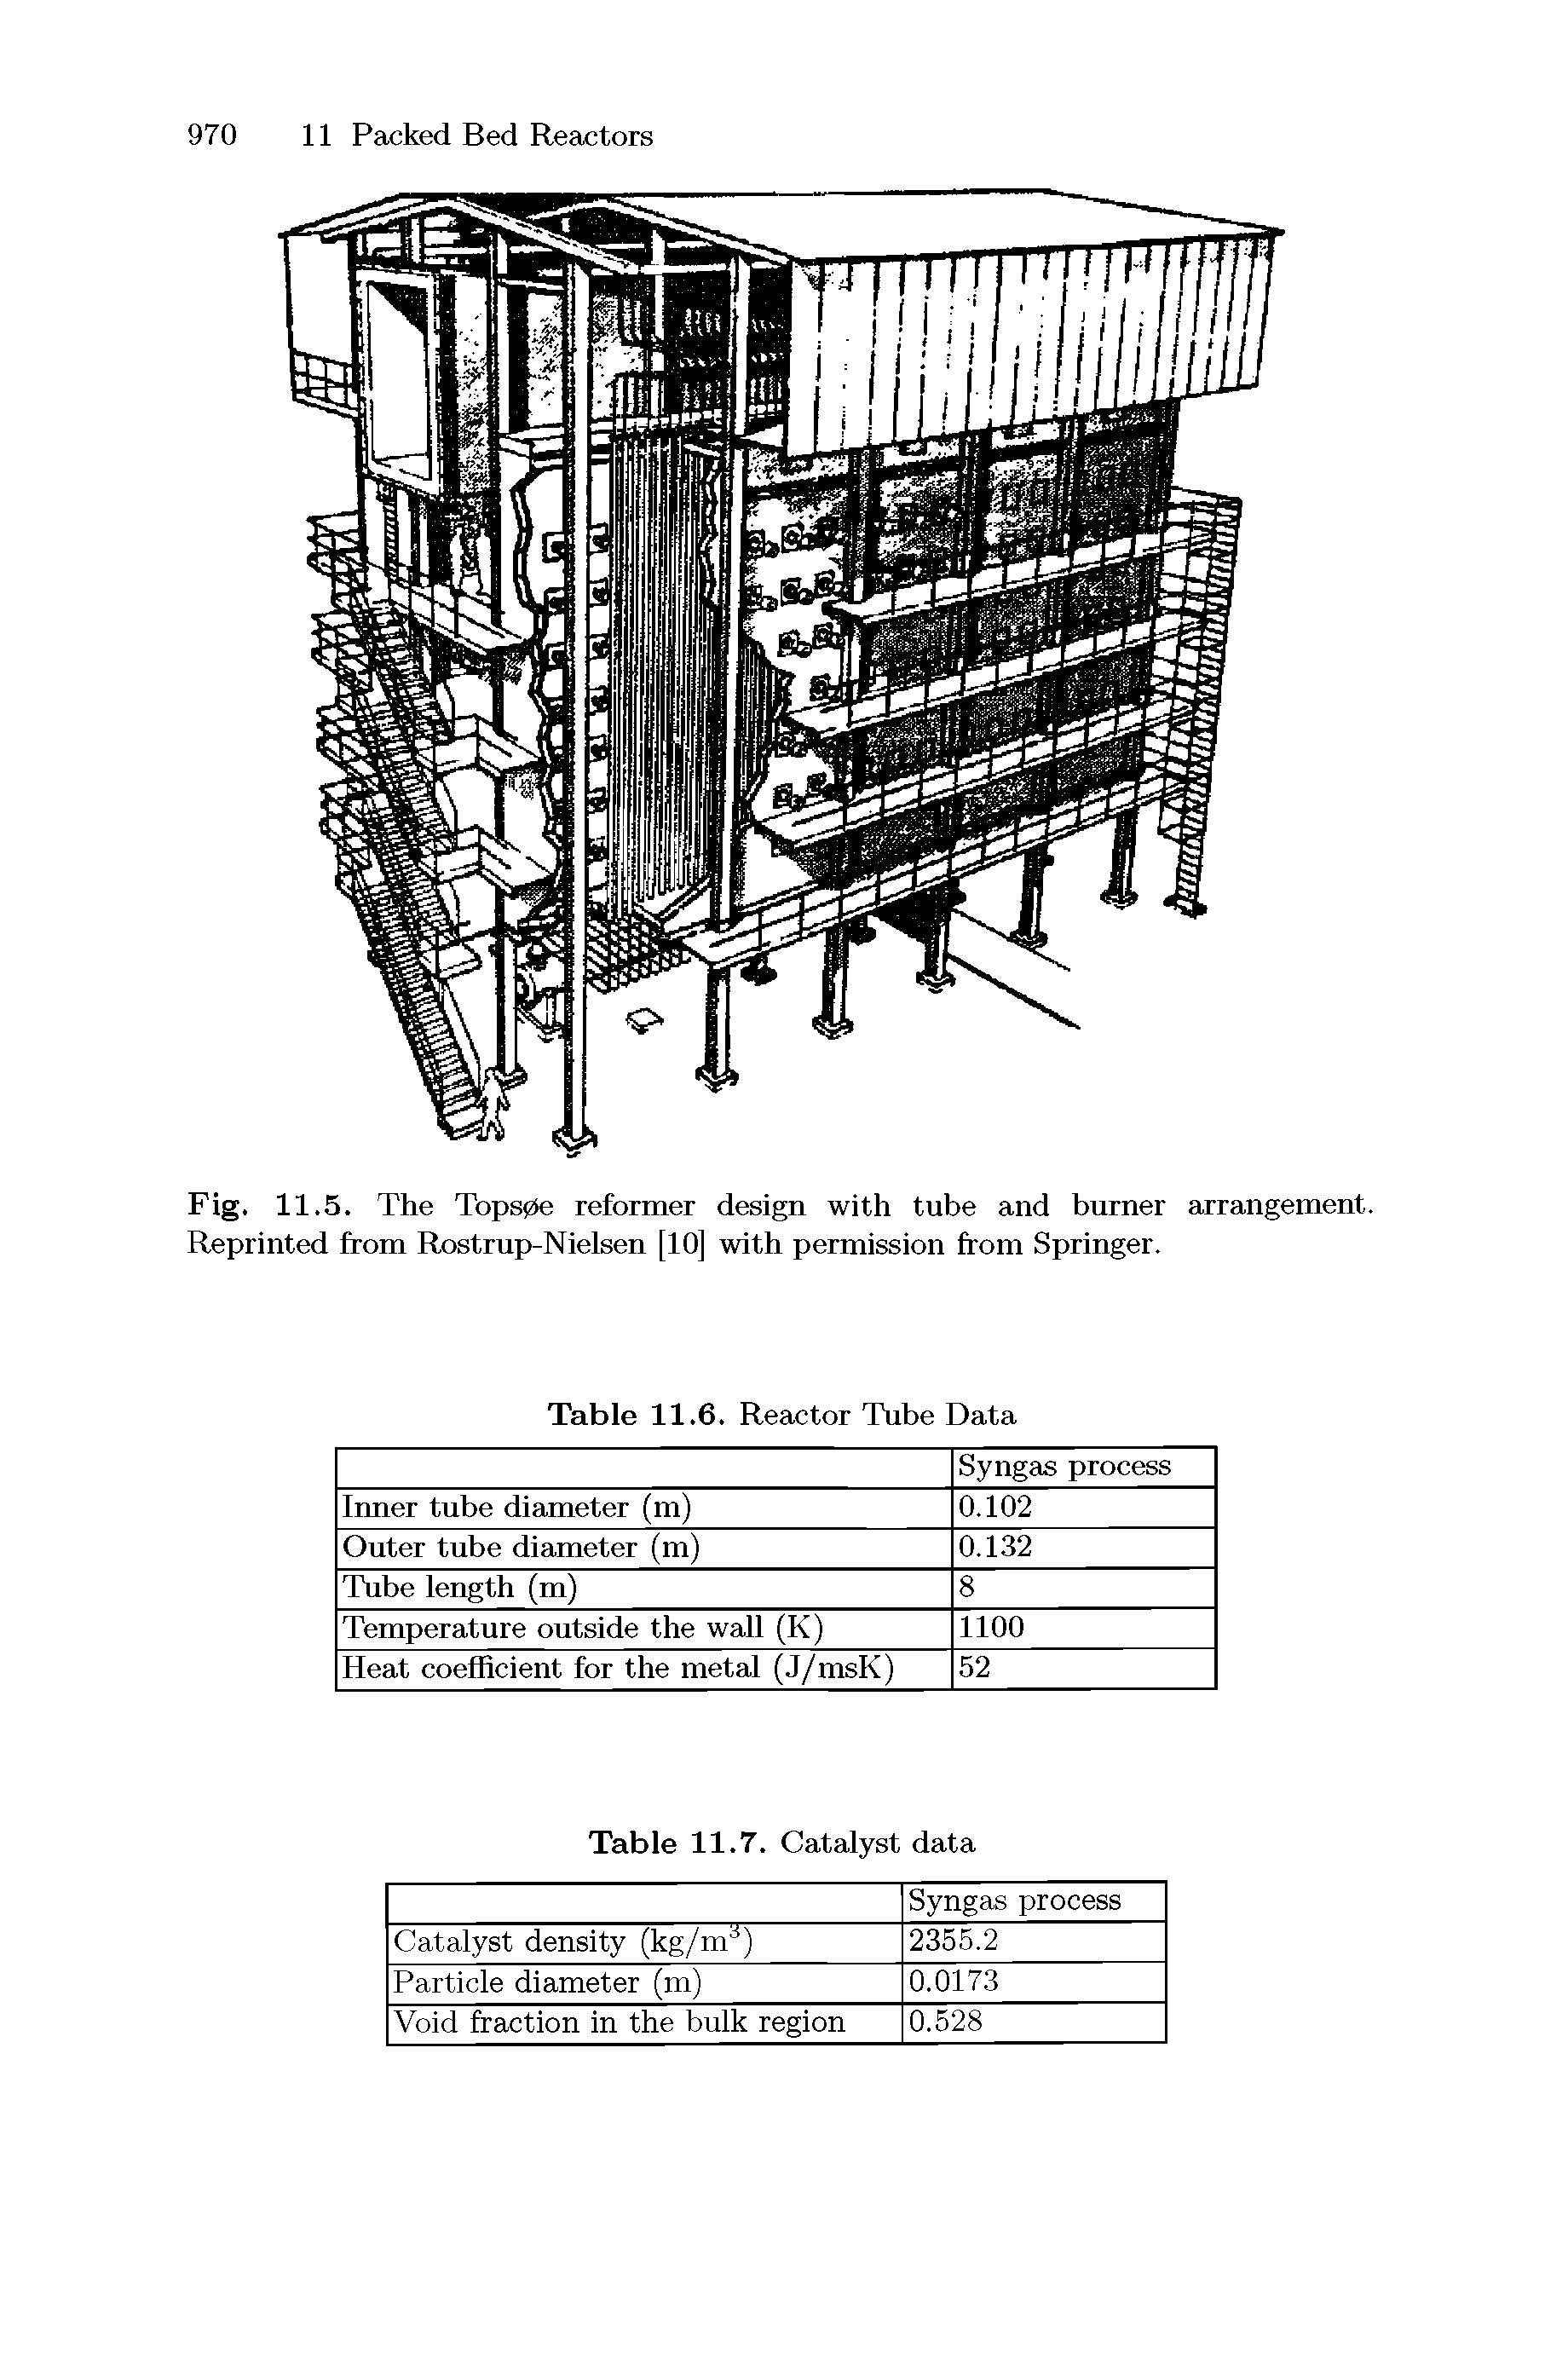 Fig. 11.5. The Tops0e reformer design with tube and burner arrangement. Reprinted from Rostrup-Nielsen [10] with permission from Springer.